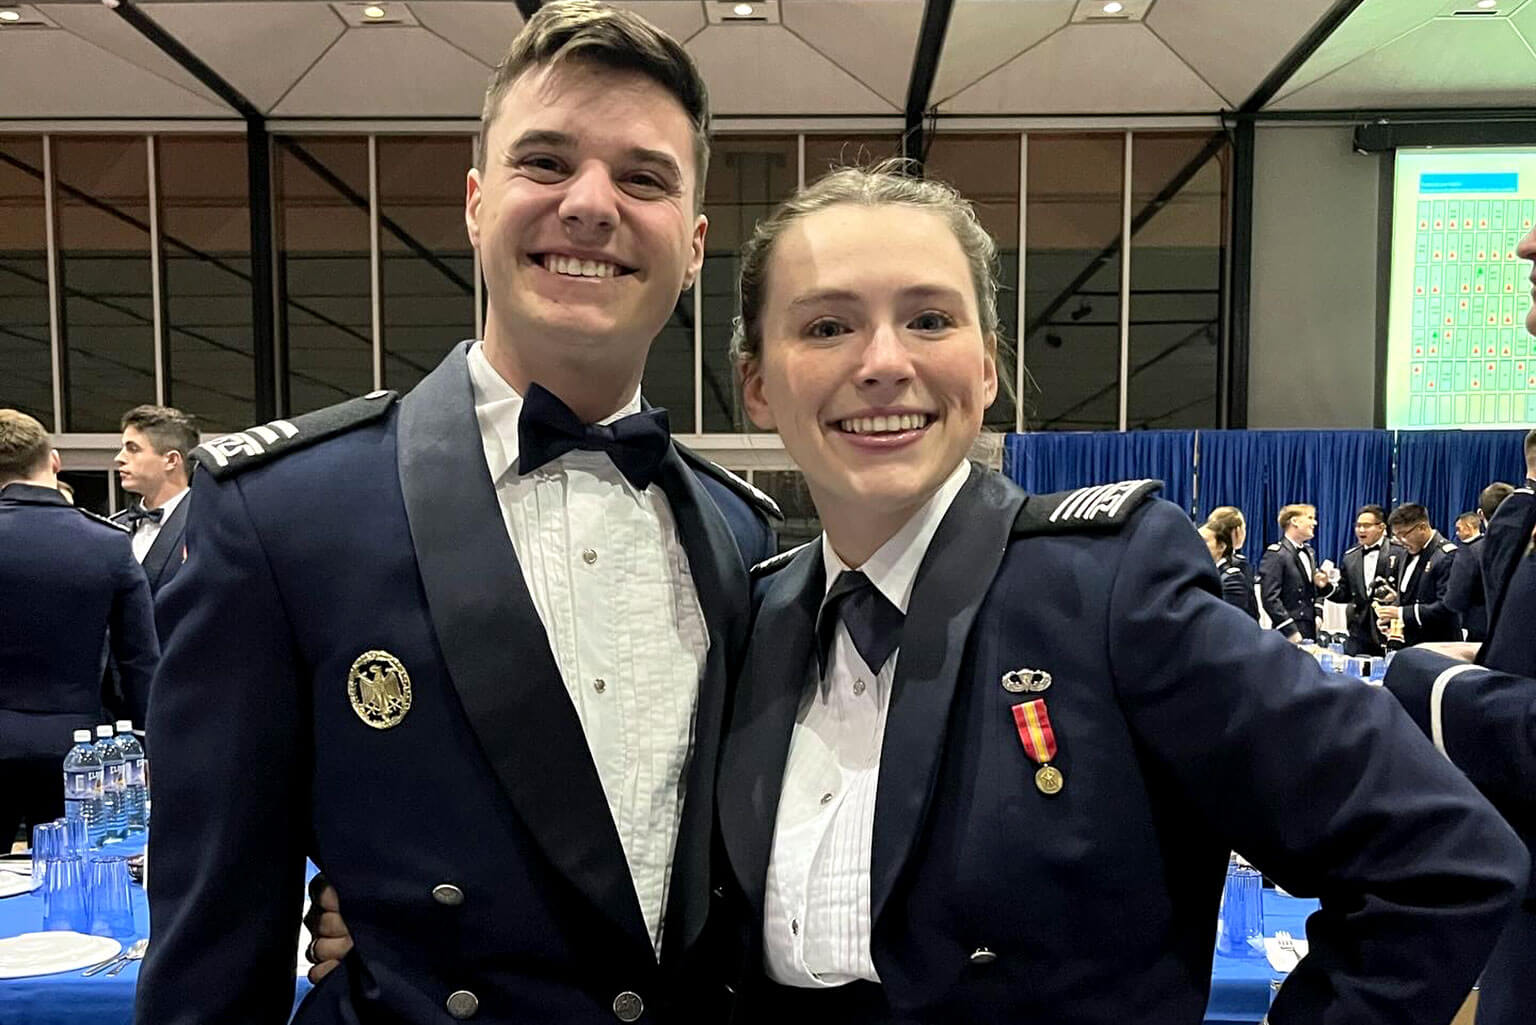 U.S. Air Force Academy Cadet 1st Class Helen Works poses with Cadet 1st Class Christian Posner, at the 100s Night Dining-in at Mitchell Hall.